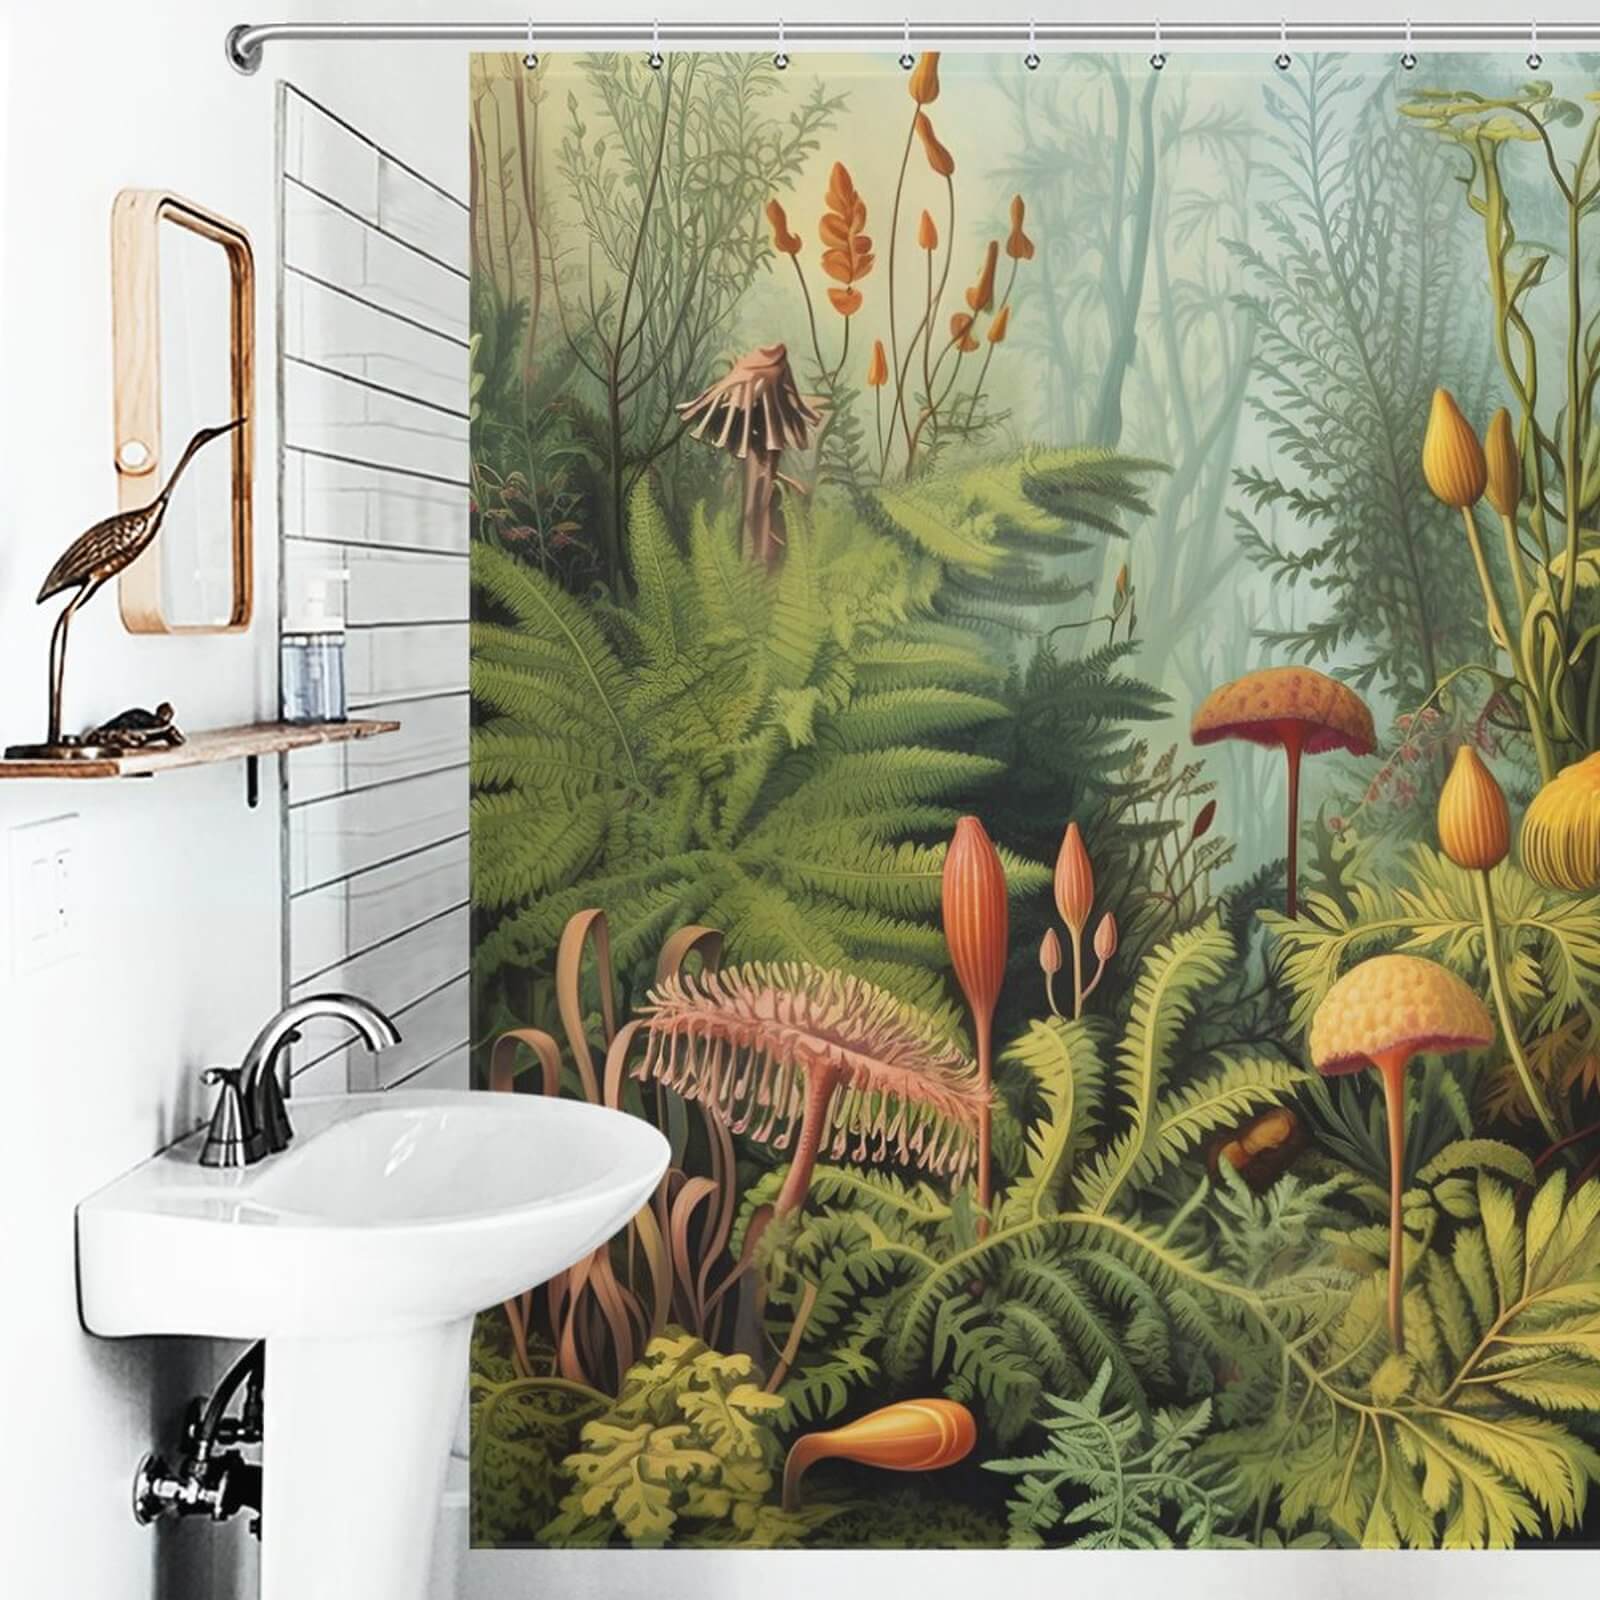 A Mushroom Jungle Shower Curtain-Cottoncat with a jungle-themed design featuring ferns and plants.